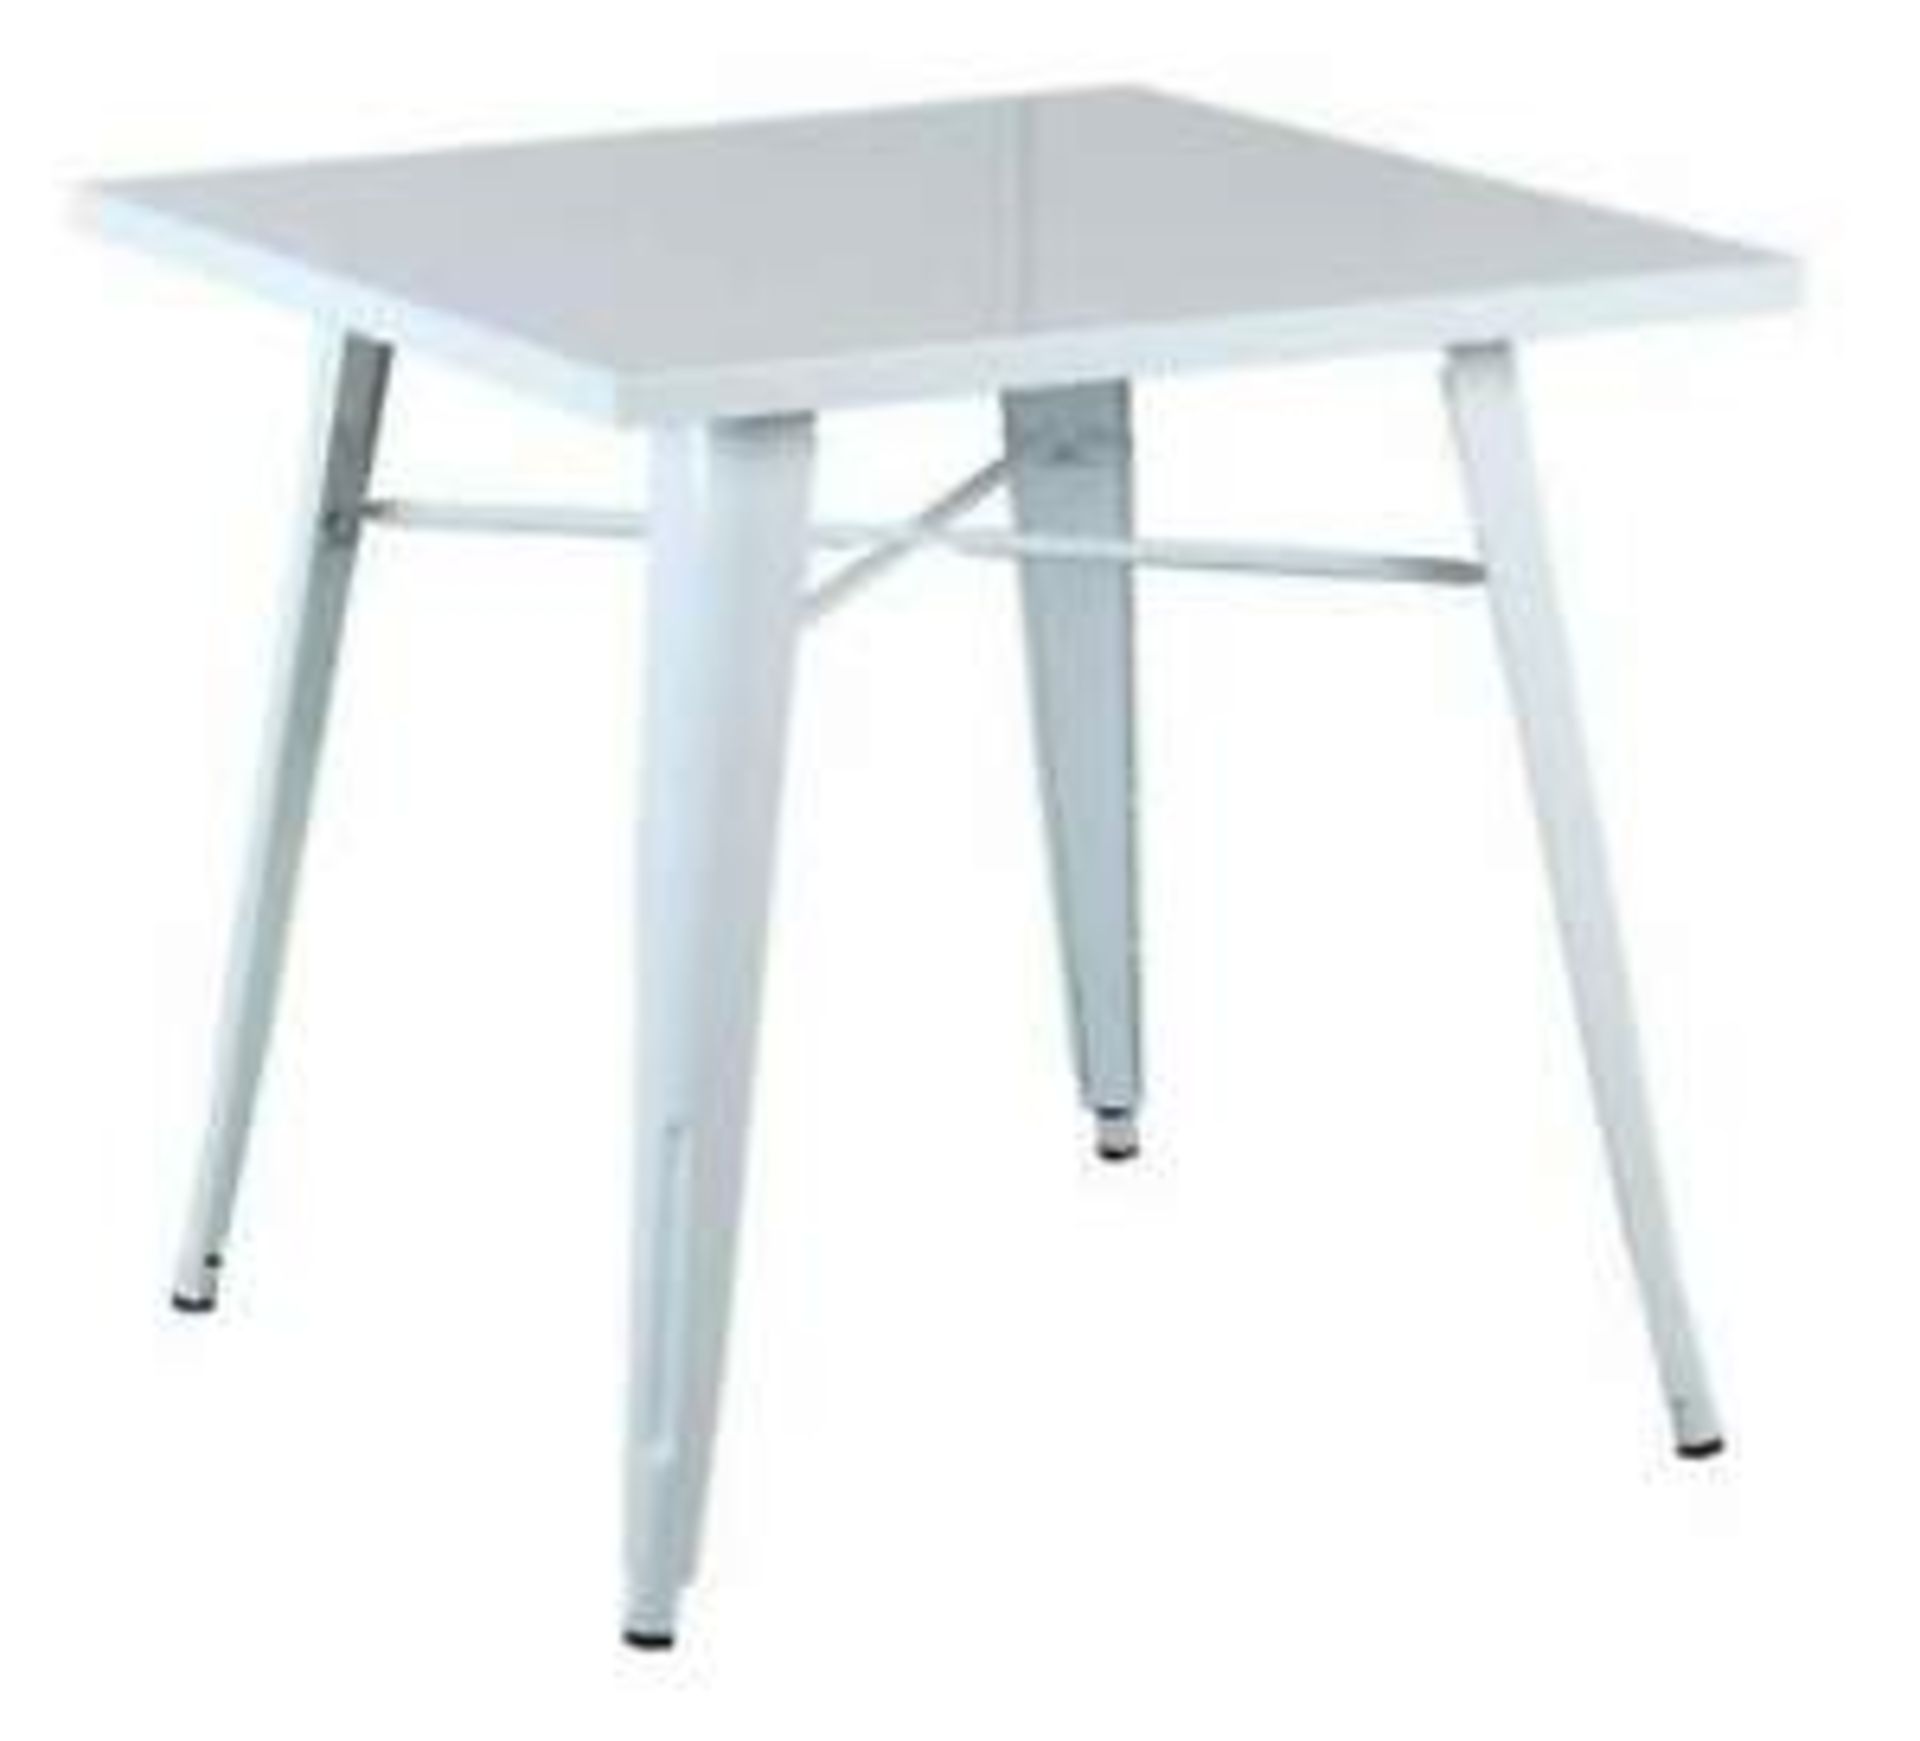 1 x Tolix Industrial Style Outdoor Bistro Table and Chair Set in White- Includes 1 x Table and 4 x - Image 2 of 12